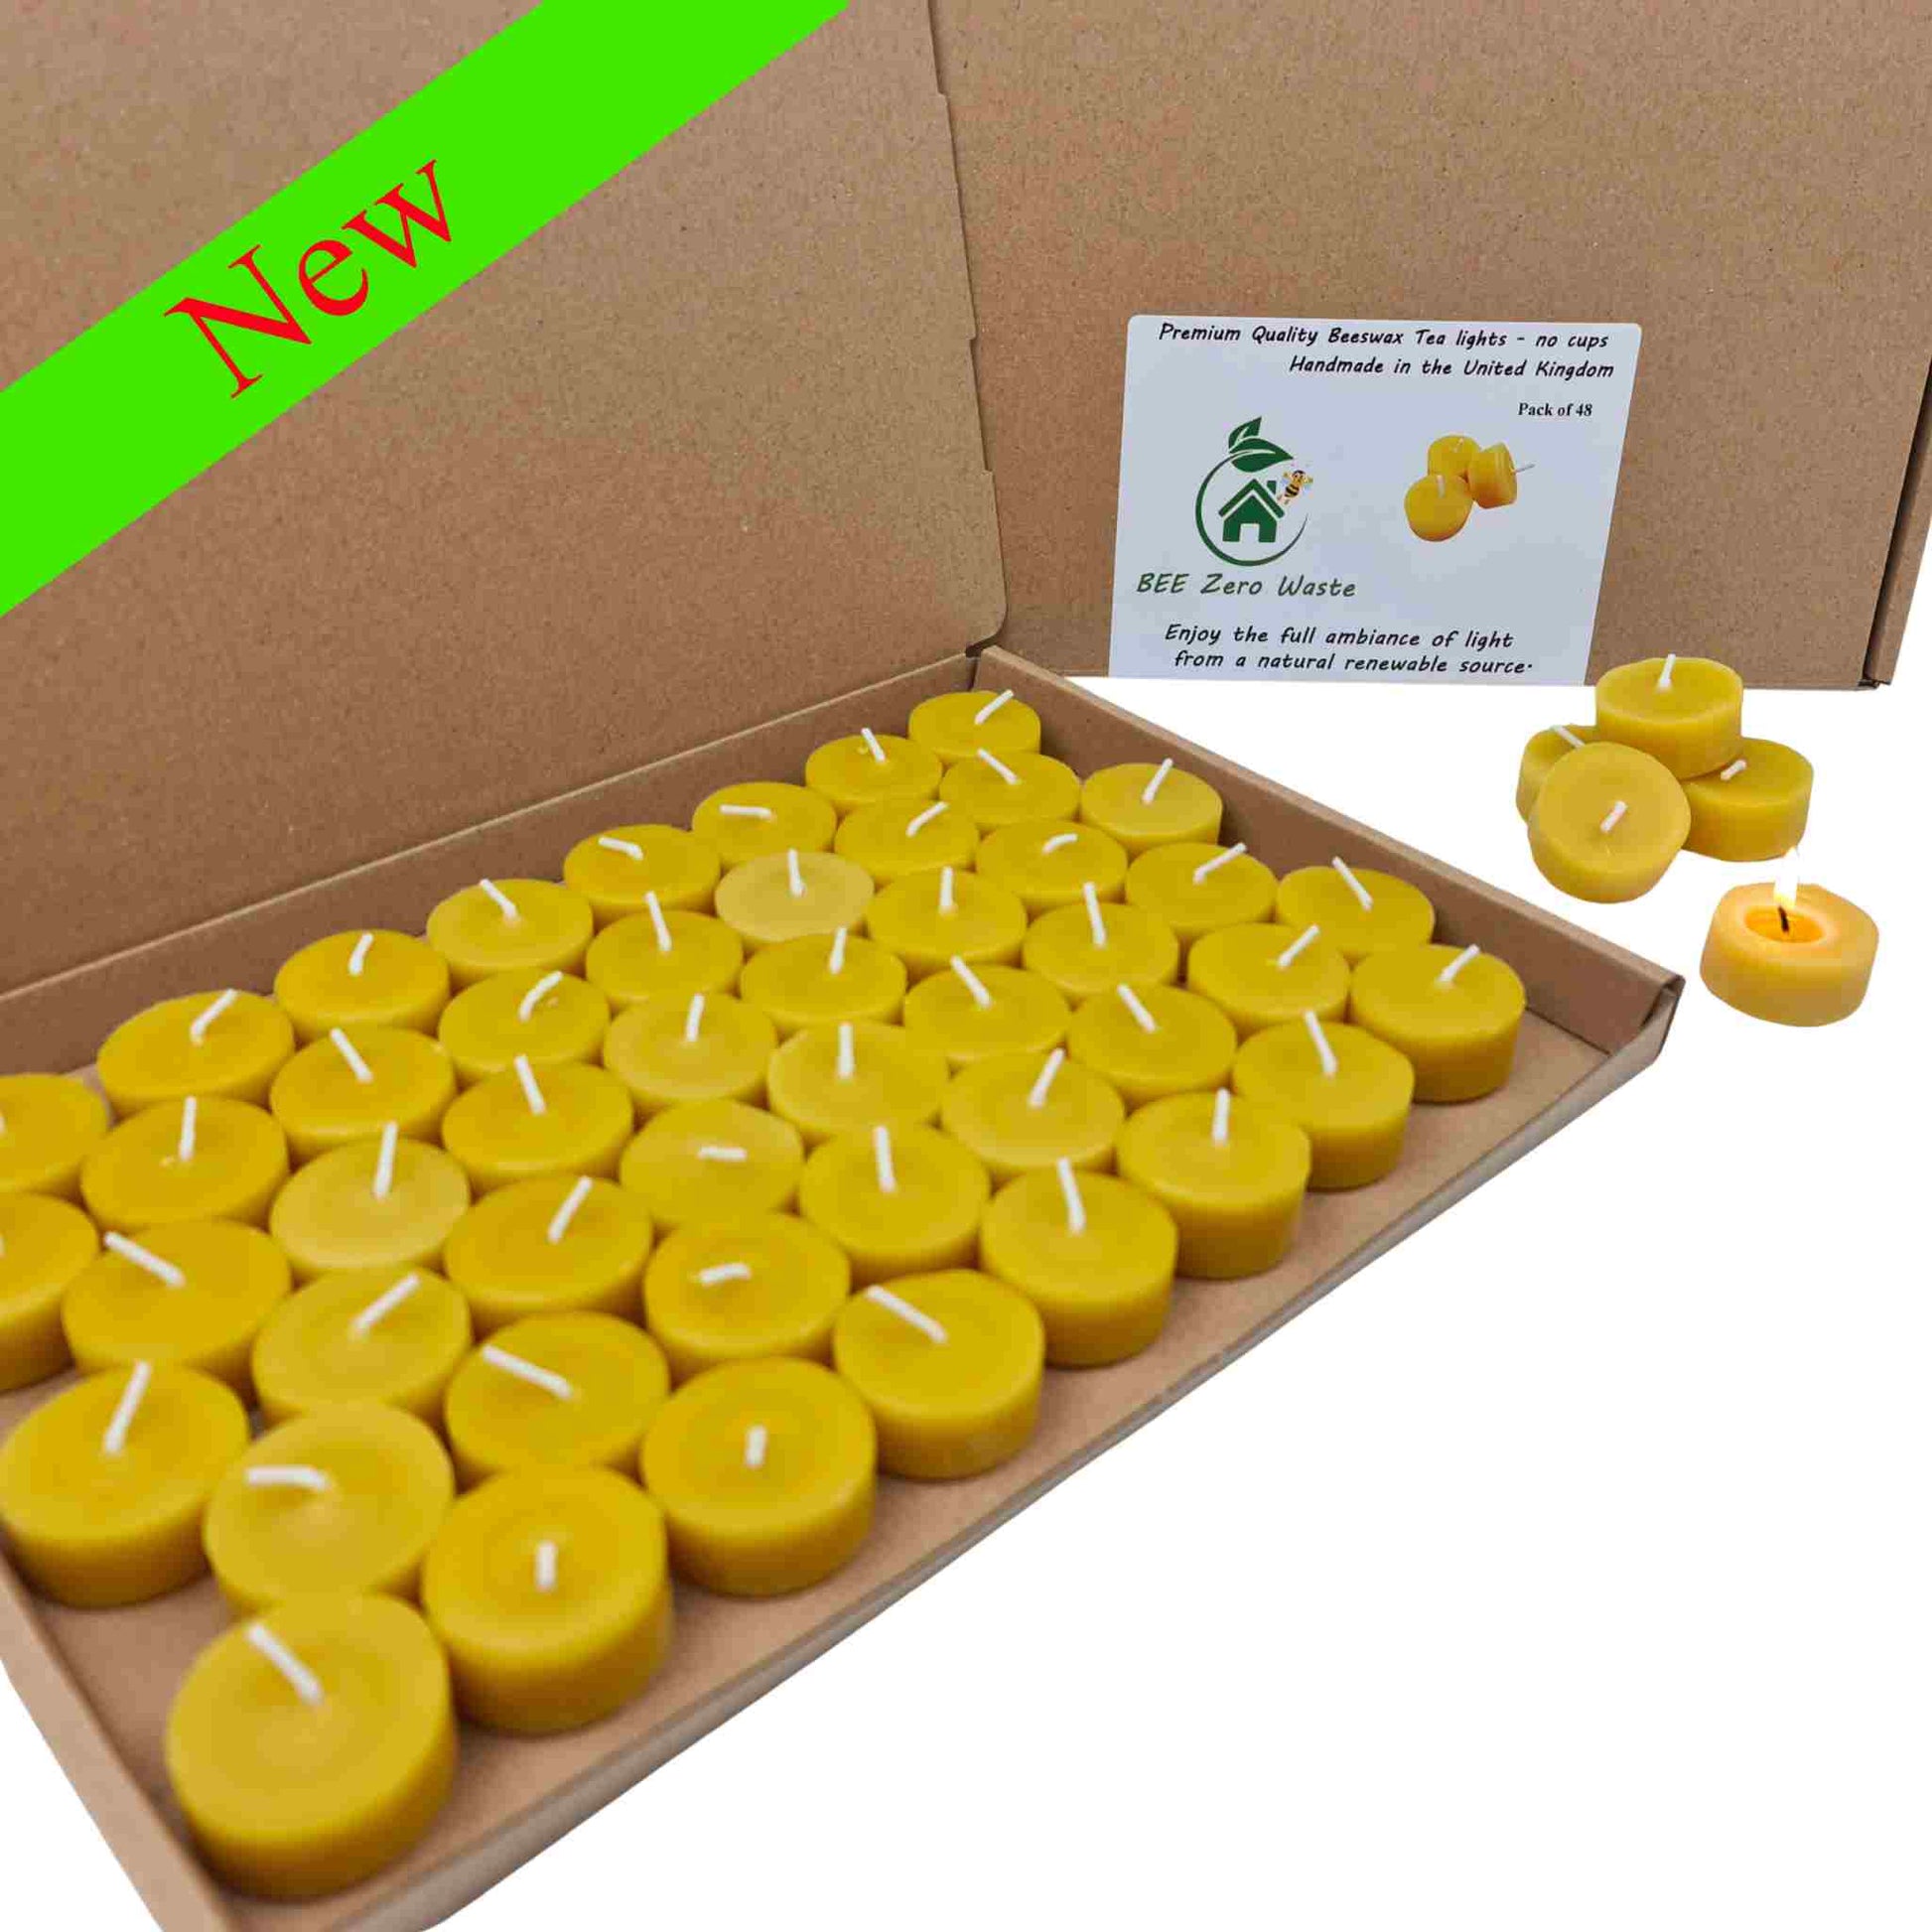 Beeswax Tealight Candles - Natural and Eco-Friendly Ambiance